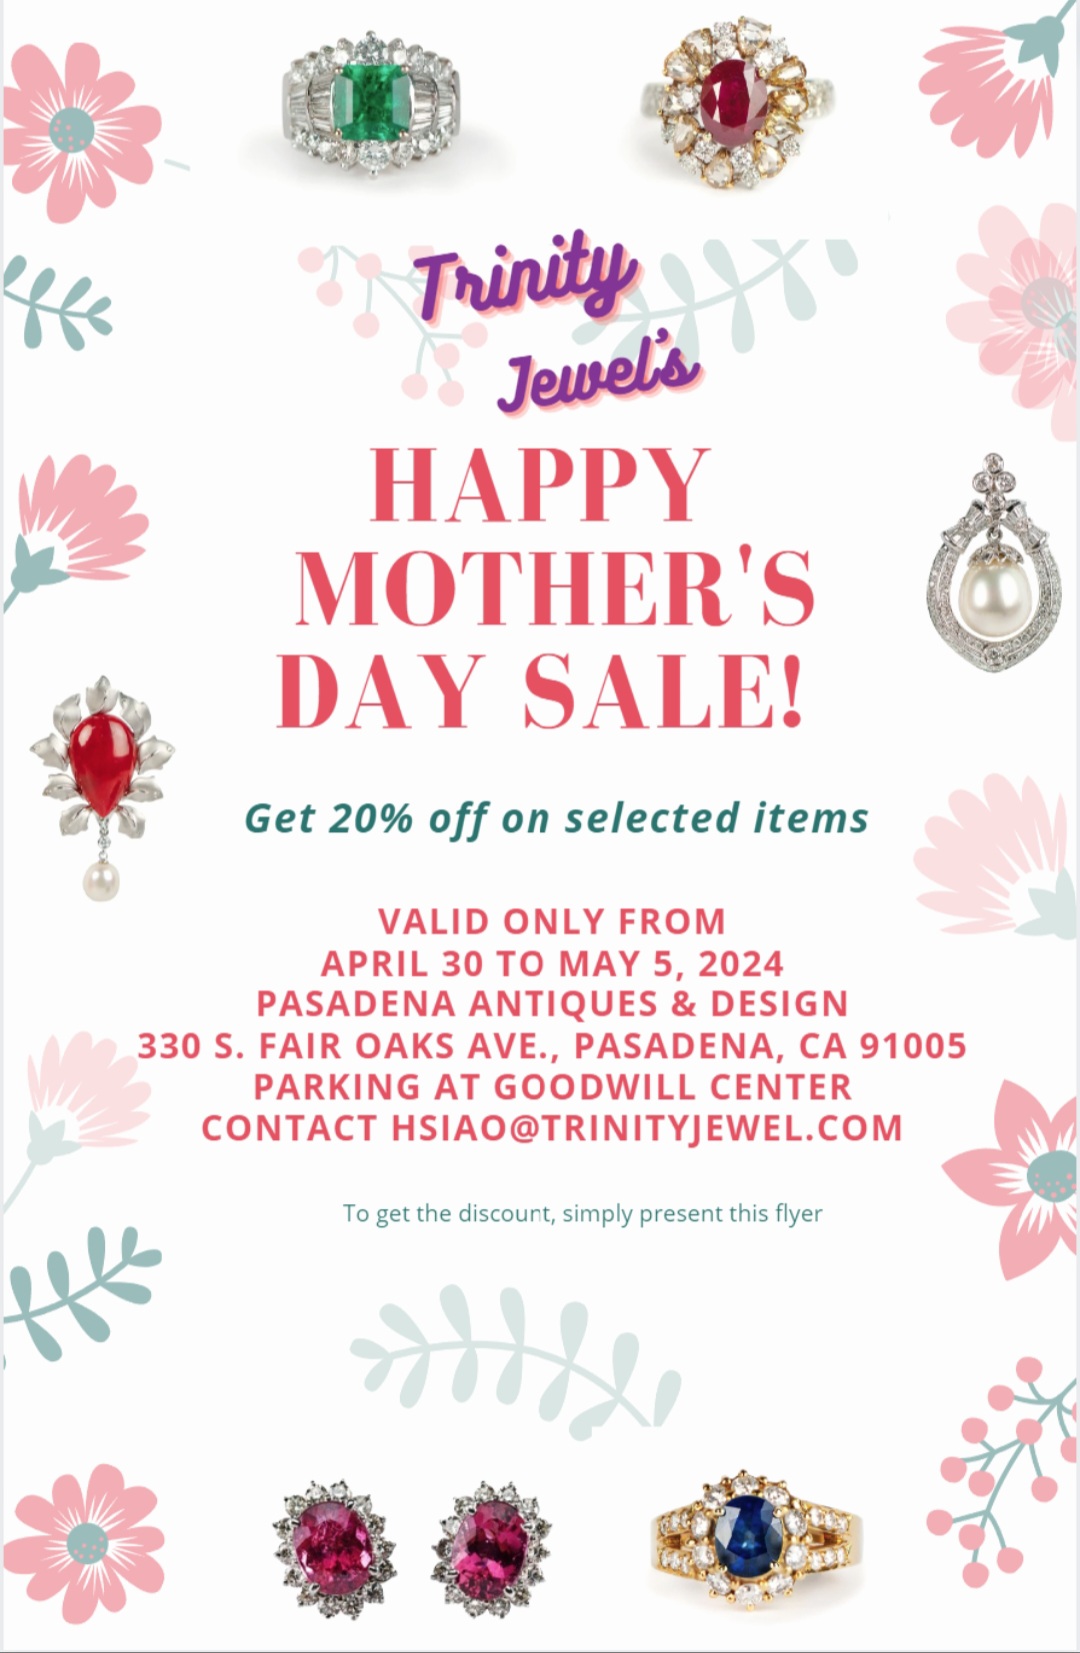 Mother's Day Sale at Trinity Jewel